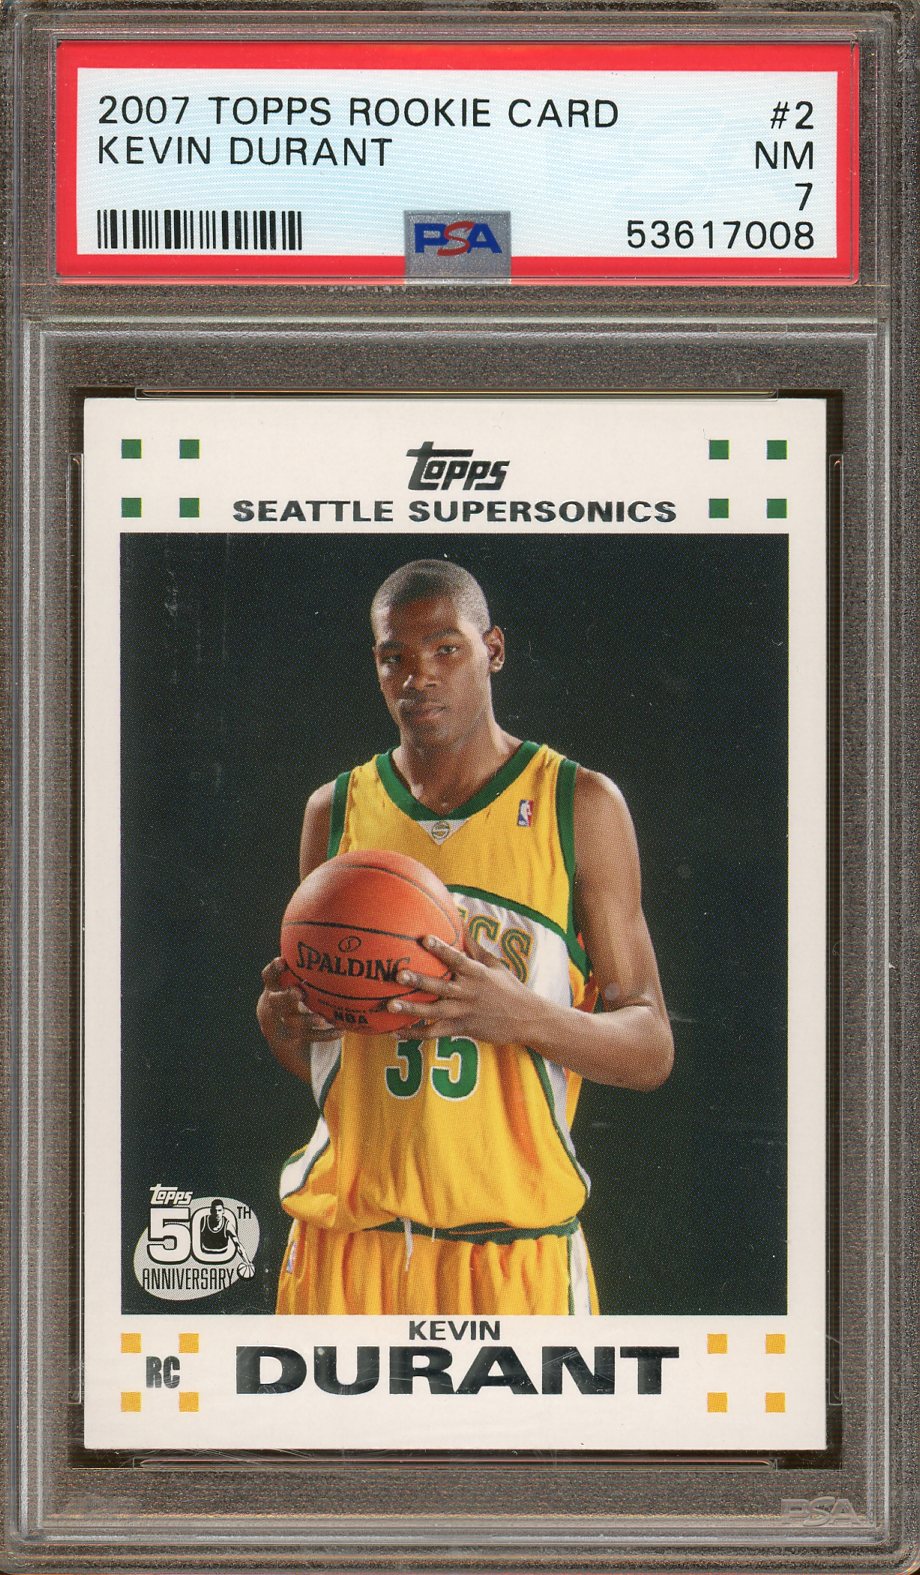 PSA - NM 7 - 2007 - Topps - Rookie Card - Kevin Durant